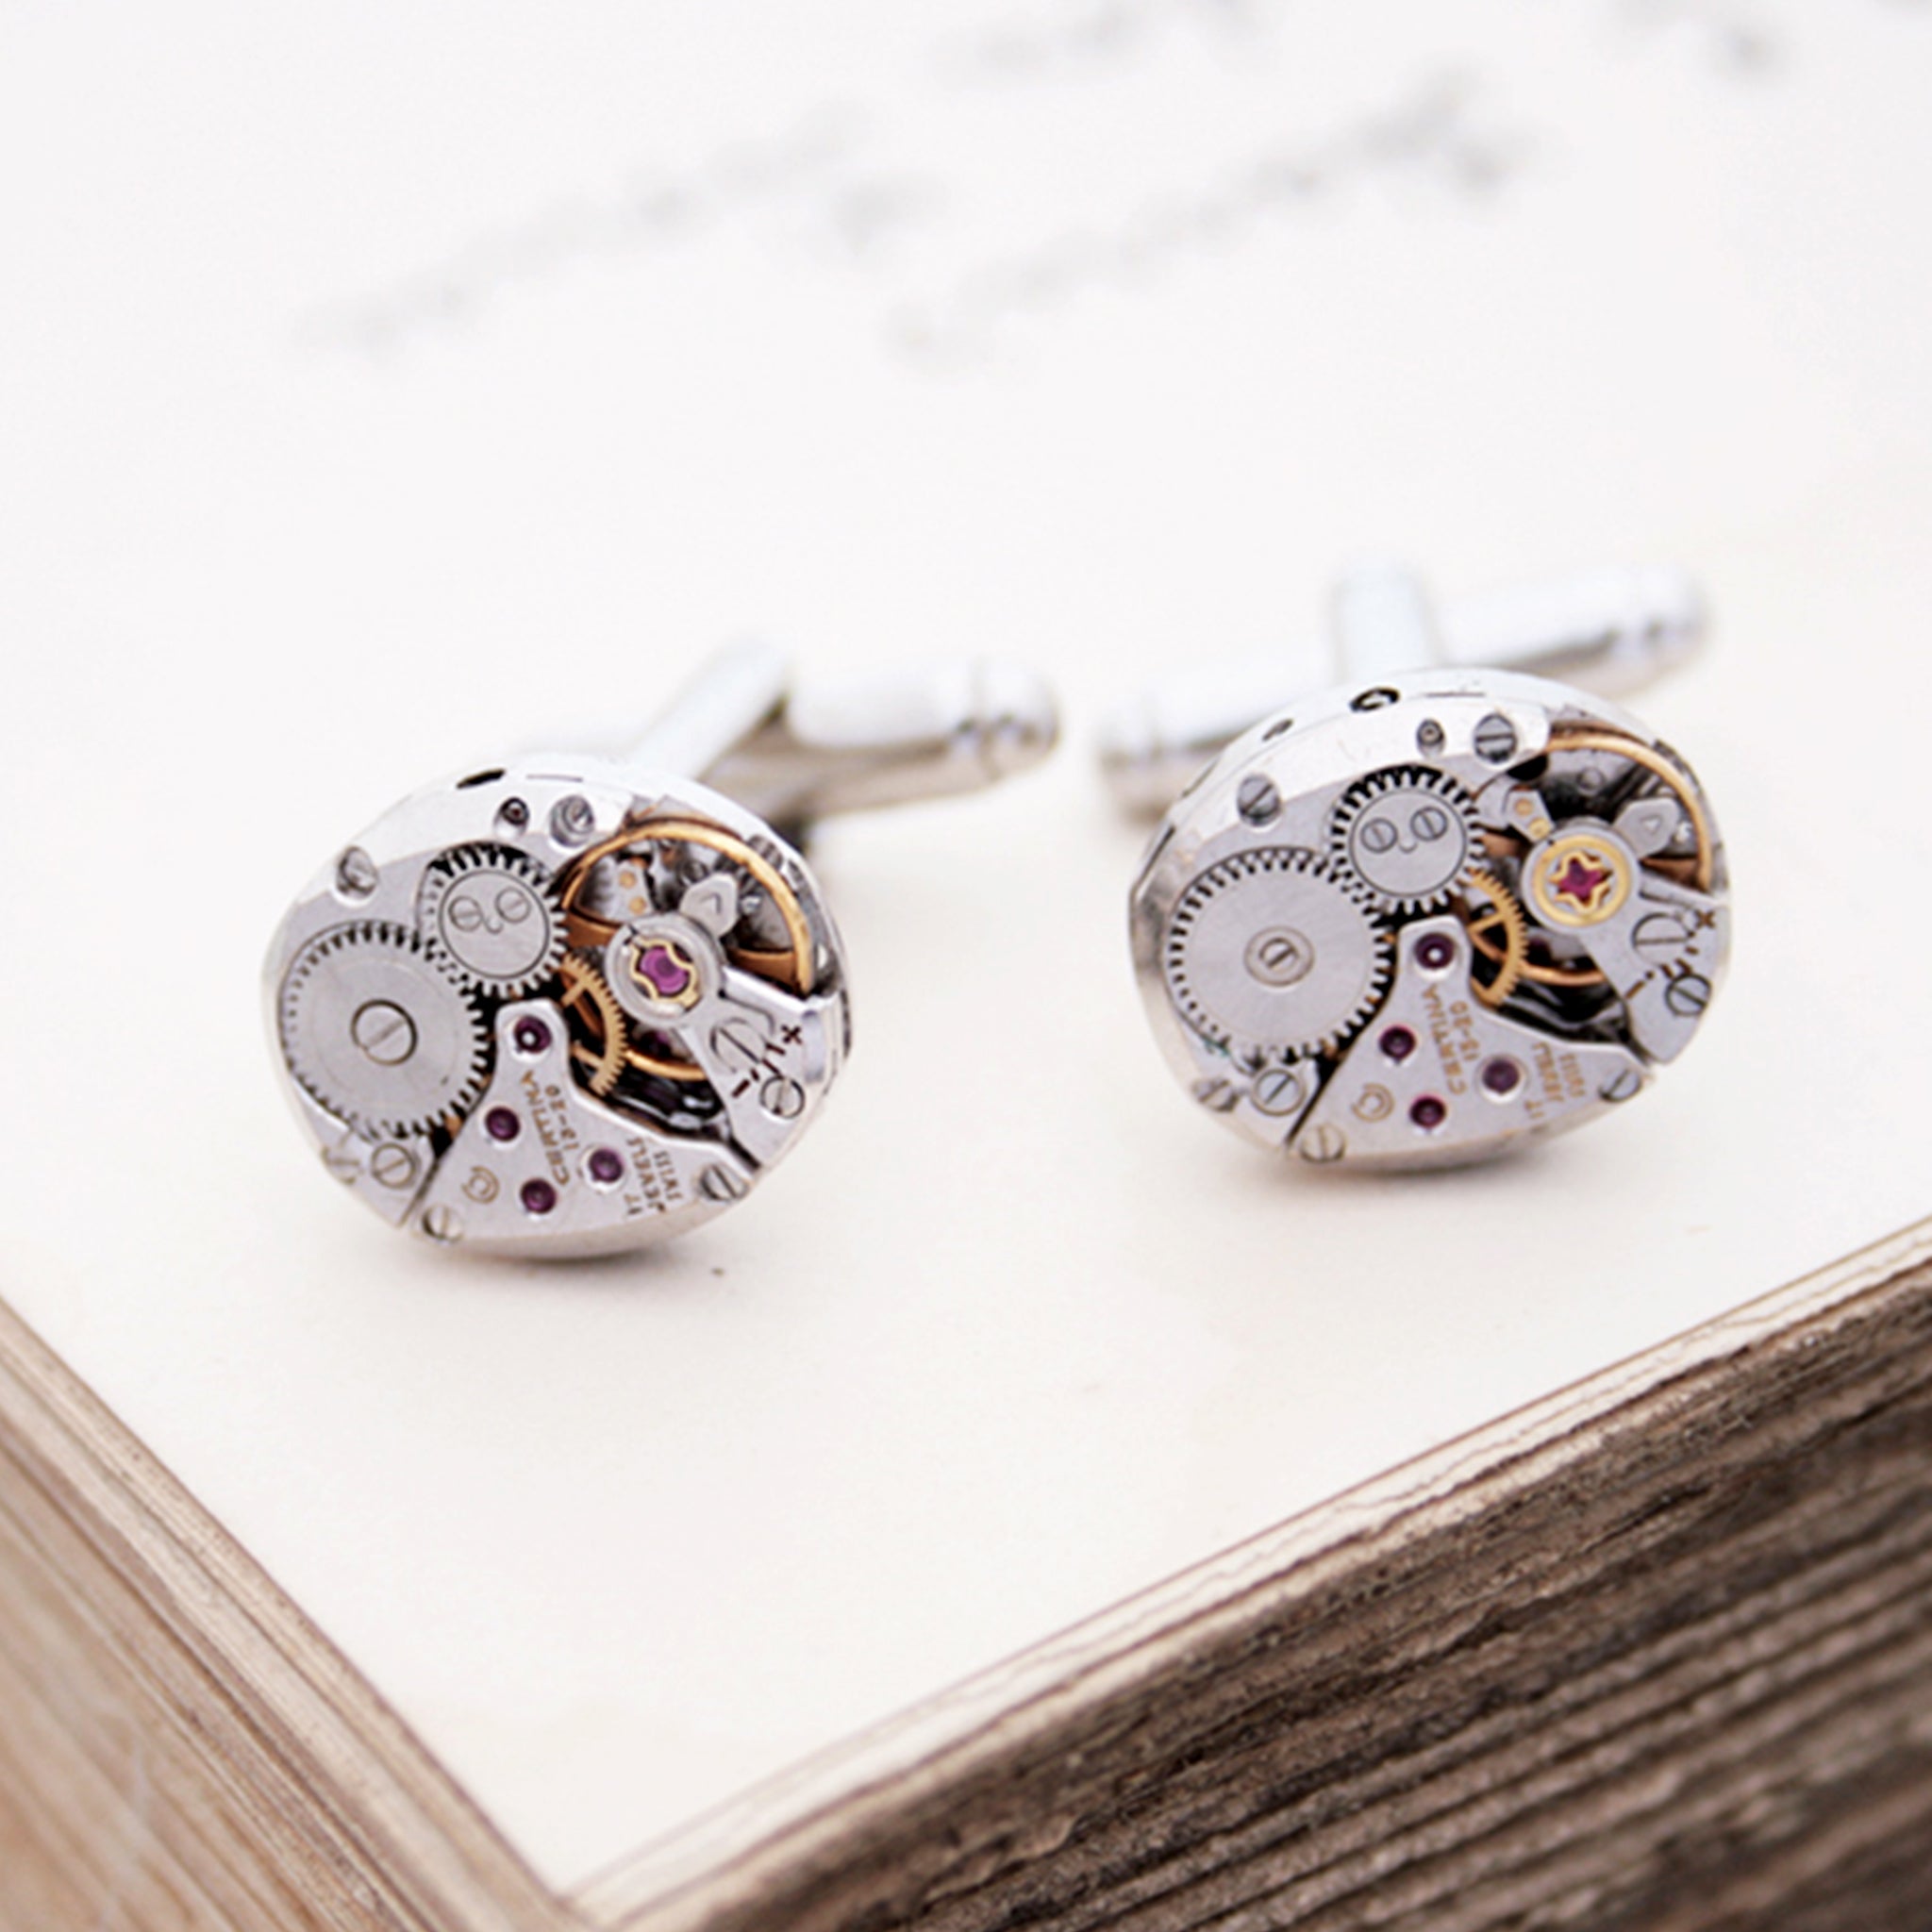 Deluxe Steampunk Cufflinks made of real watch movements on sterling backs